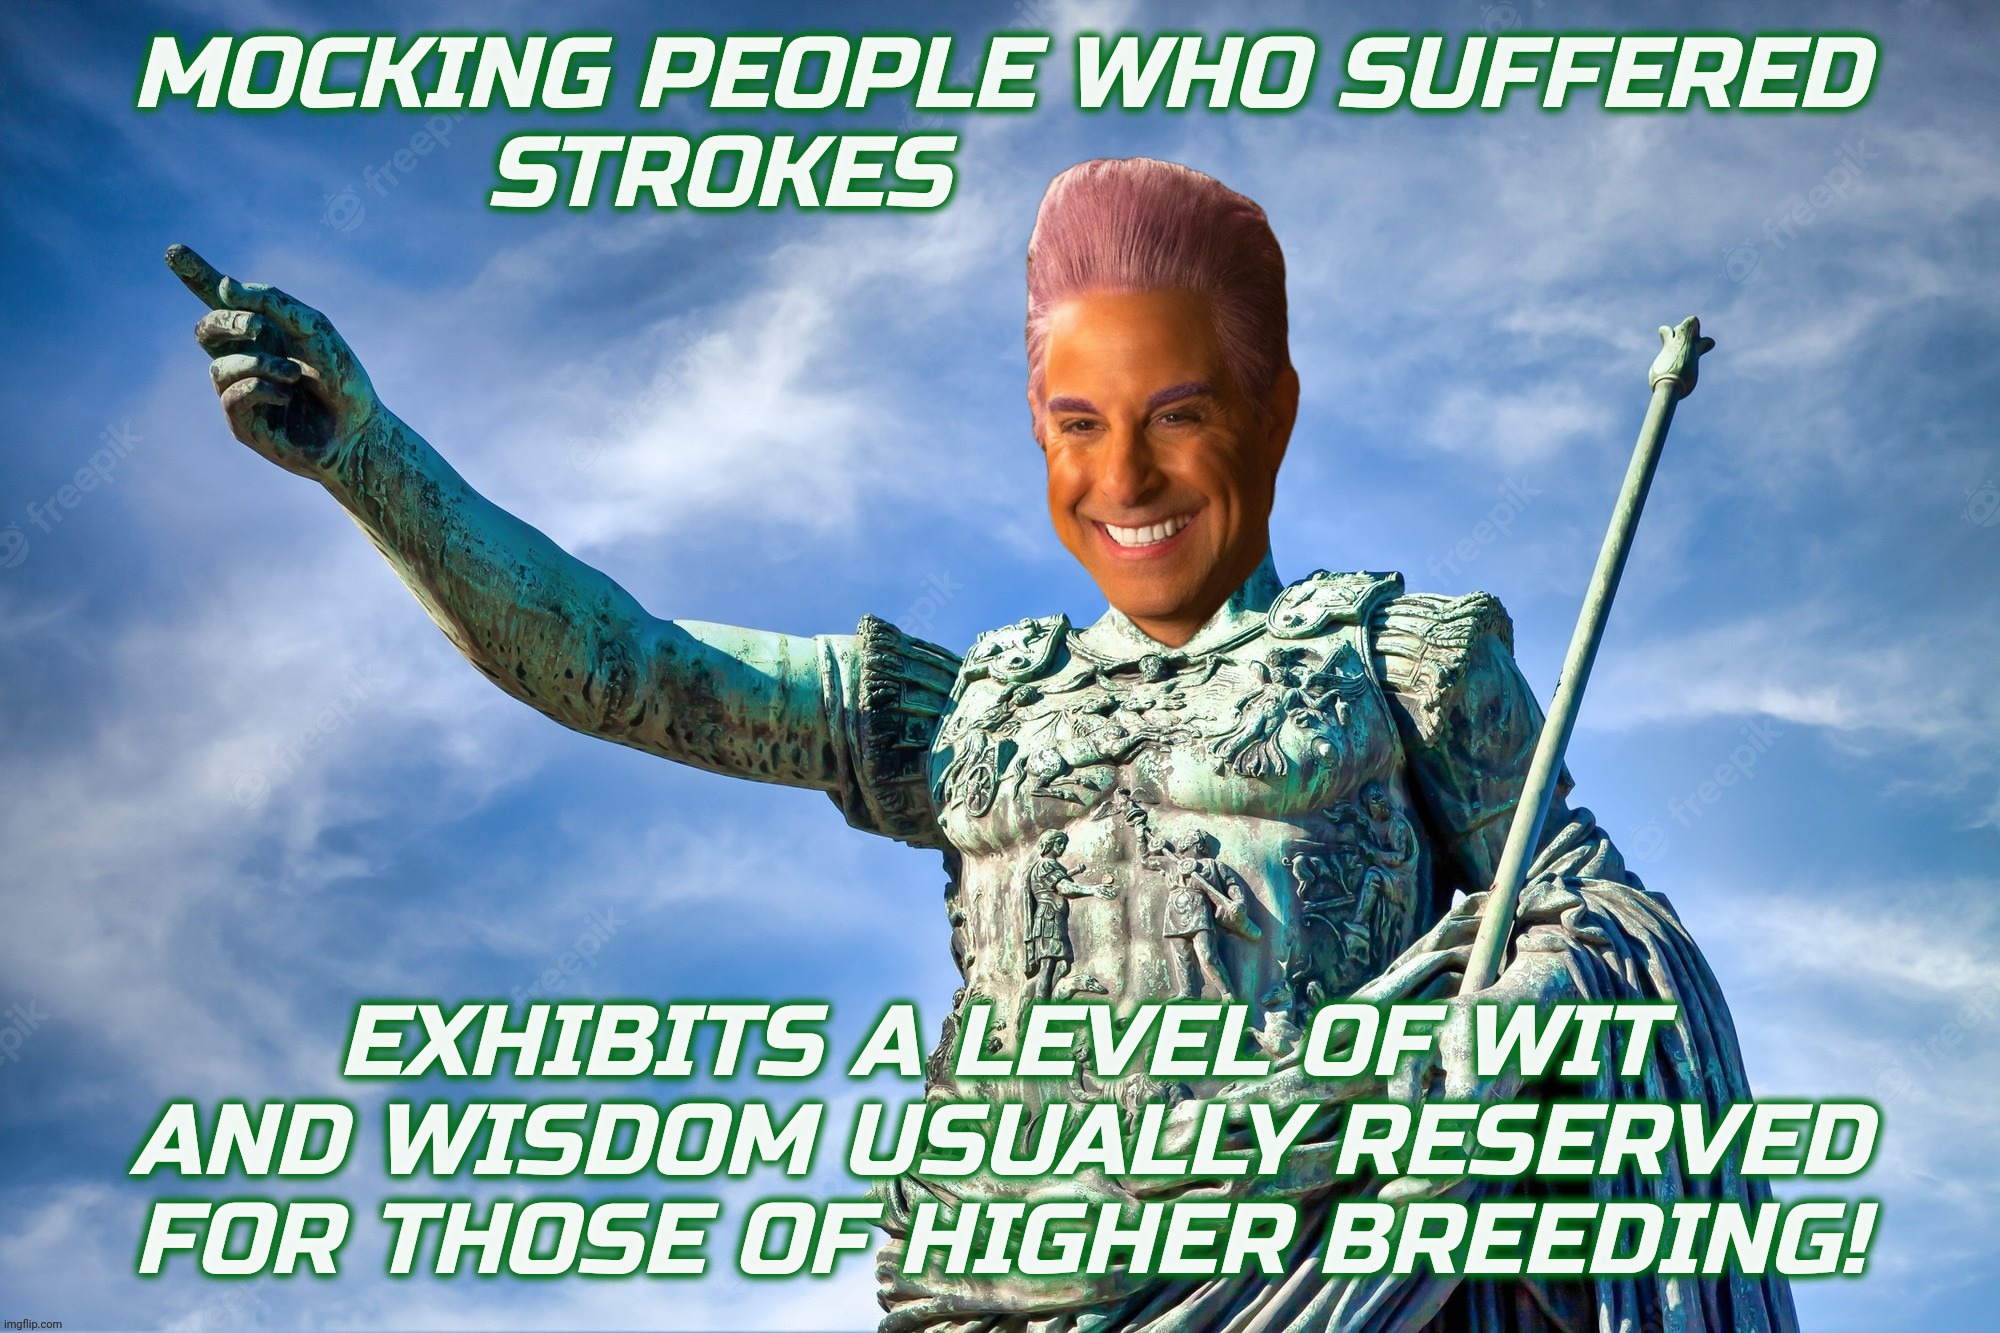 Caesar Flickerman | MOCKING PEOPLE WHO SUFFERED
STROKES EXHIBITS A LEVEL OF WIT AND WISDOM USUALLY RESERVED FOR THOSE OF HIGHER BREEDING! | image tagged in caesar flickerman | made w/ Imgflip meme maker